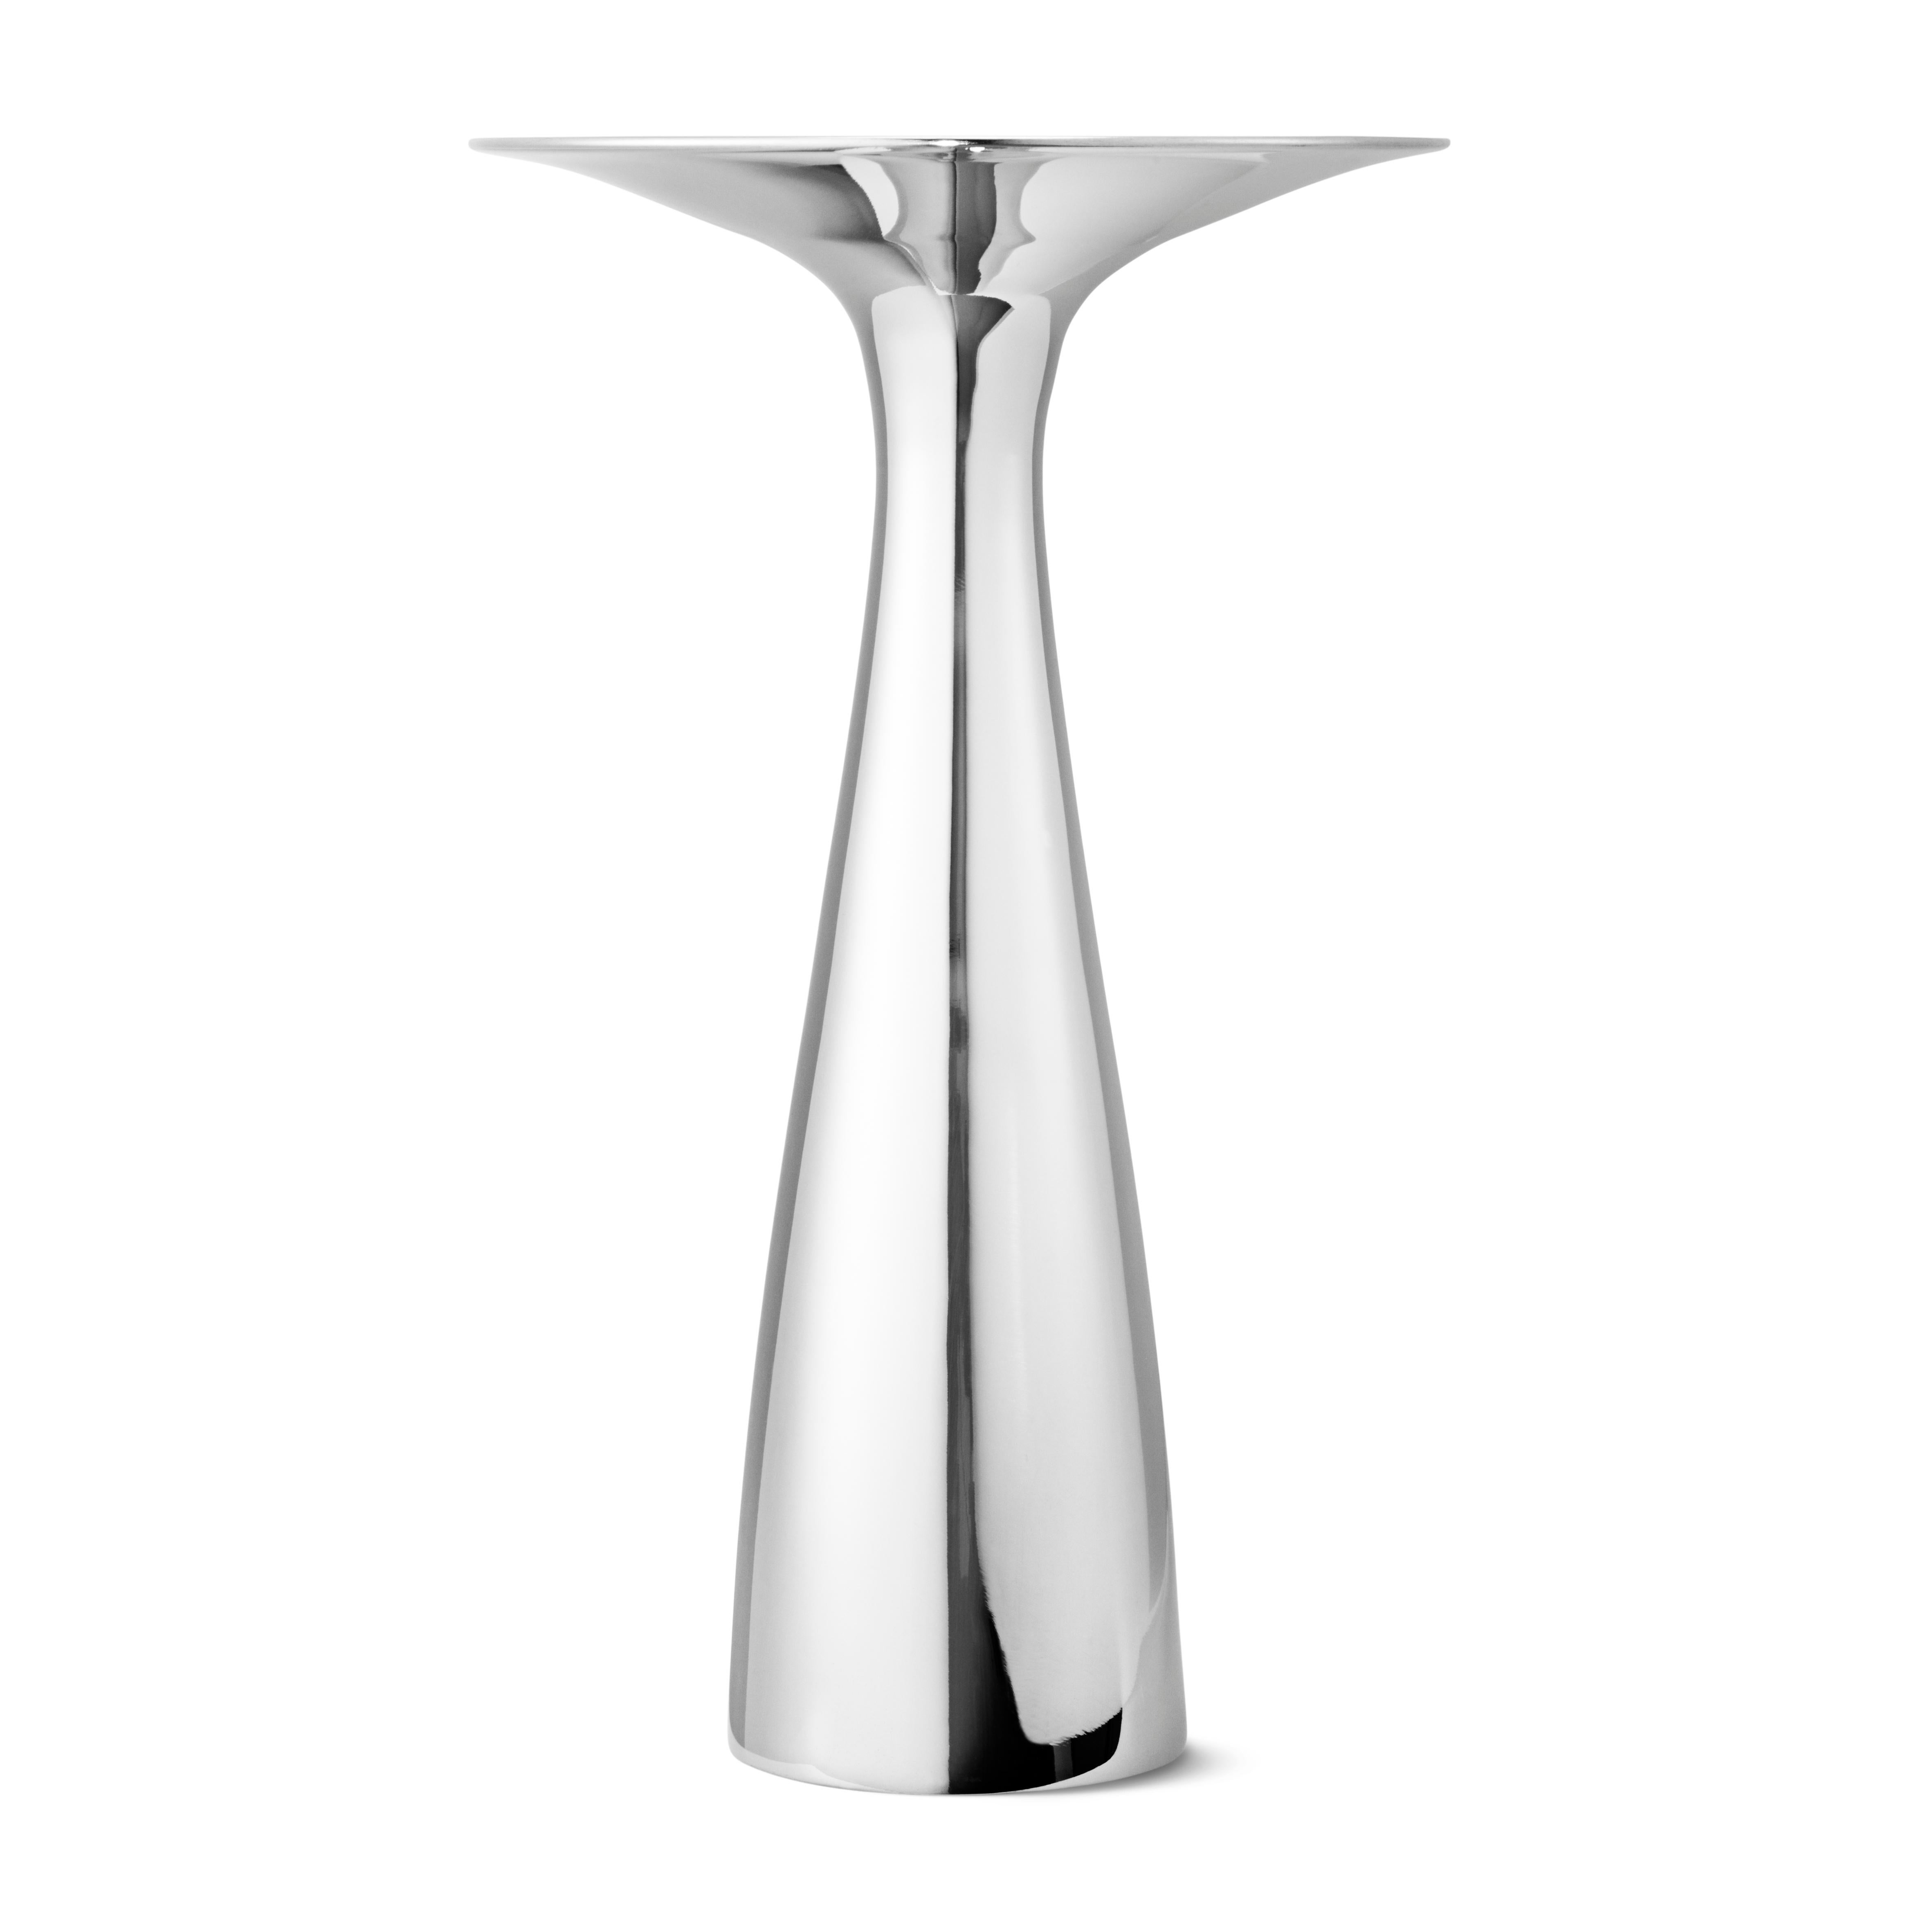 An intriguing element to the Alfredo collection is exquisitely designed candleholders in stainless steel. Its curved base leads to a shining broad top surface that beautifully reflects the light from a flickering candle. The distinctive accents